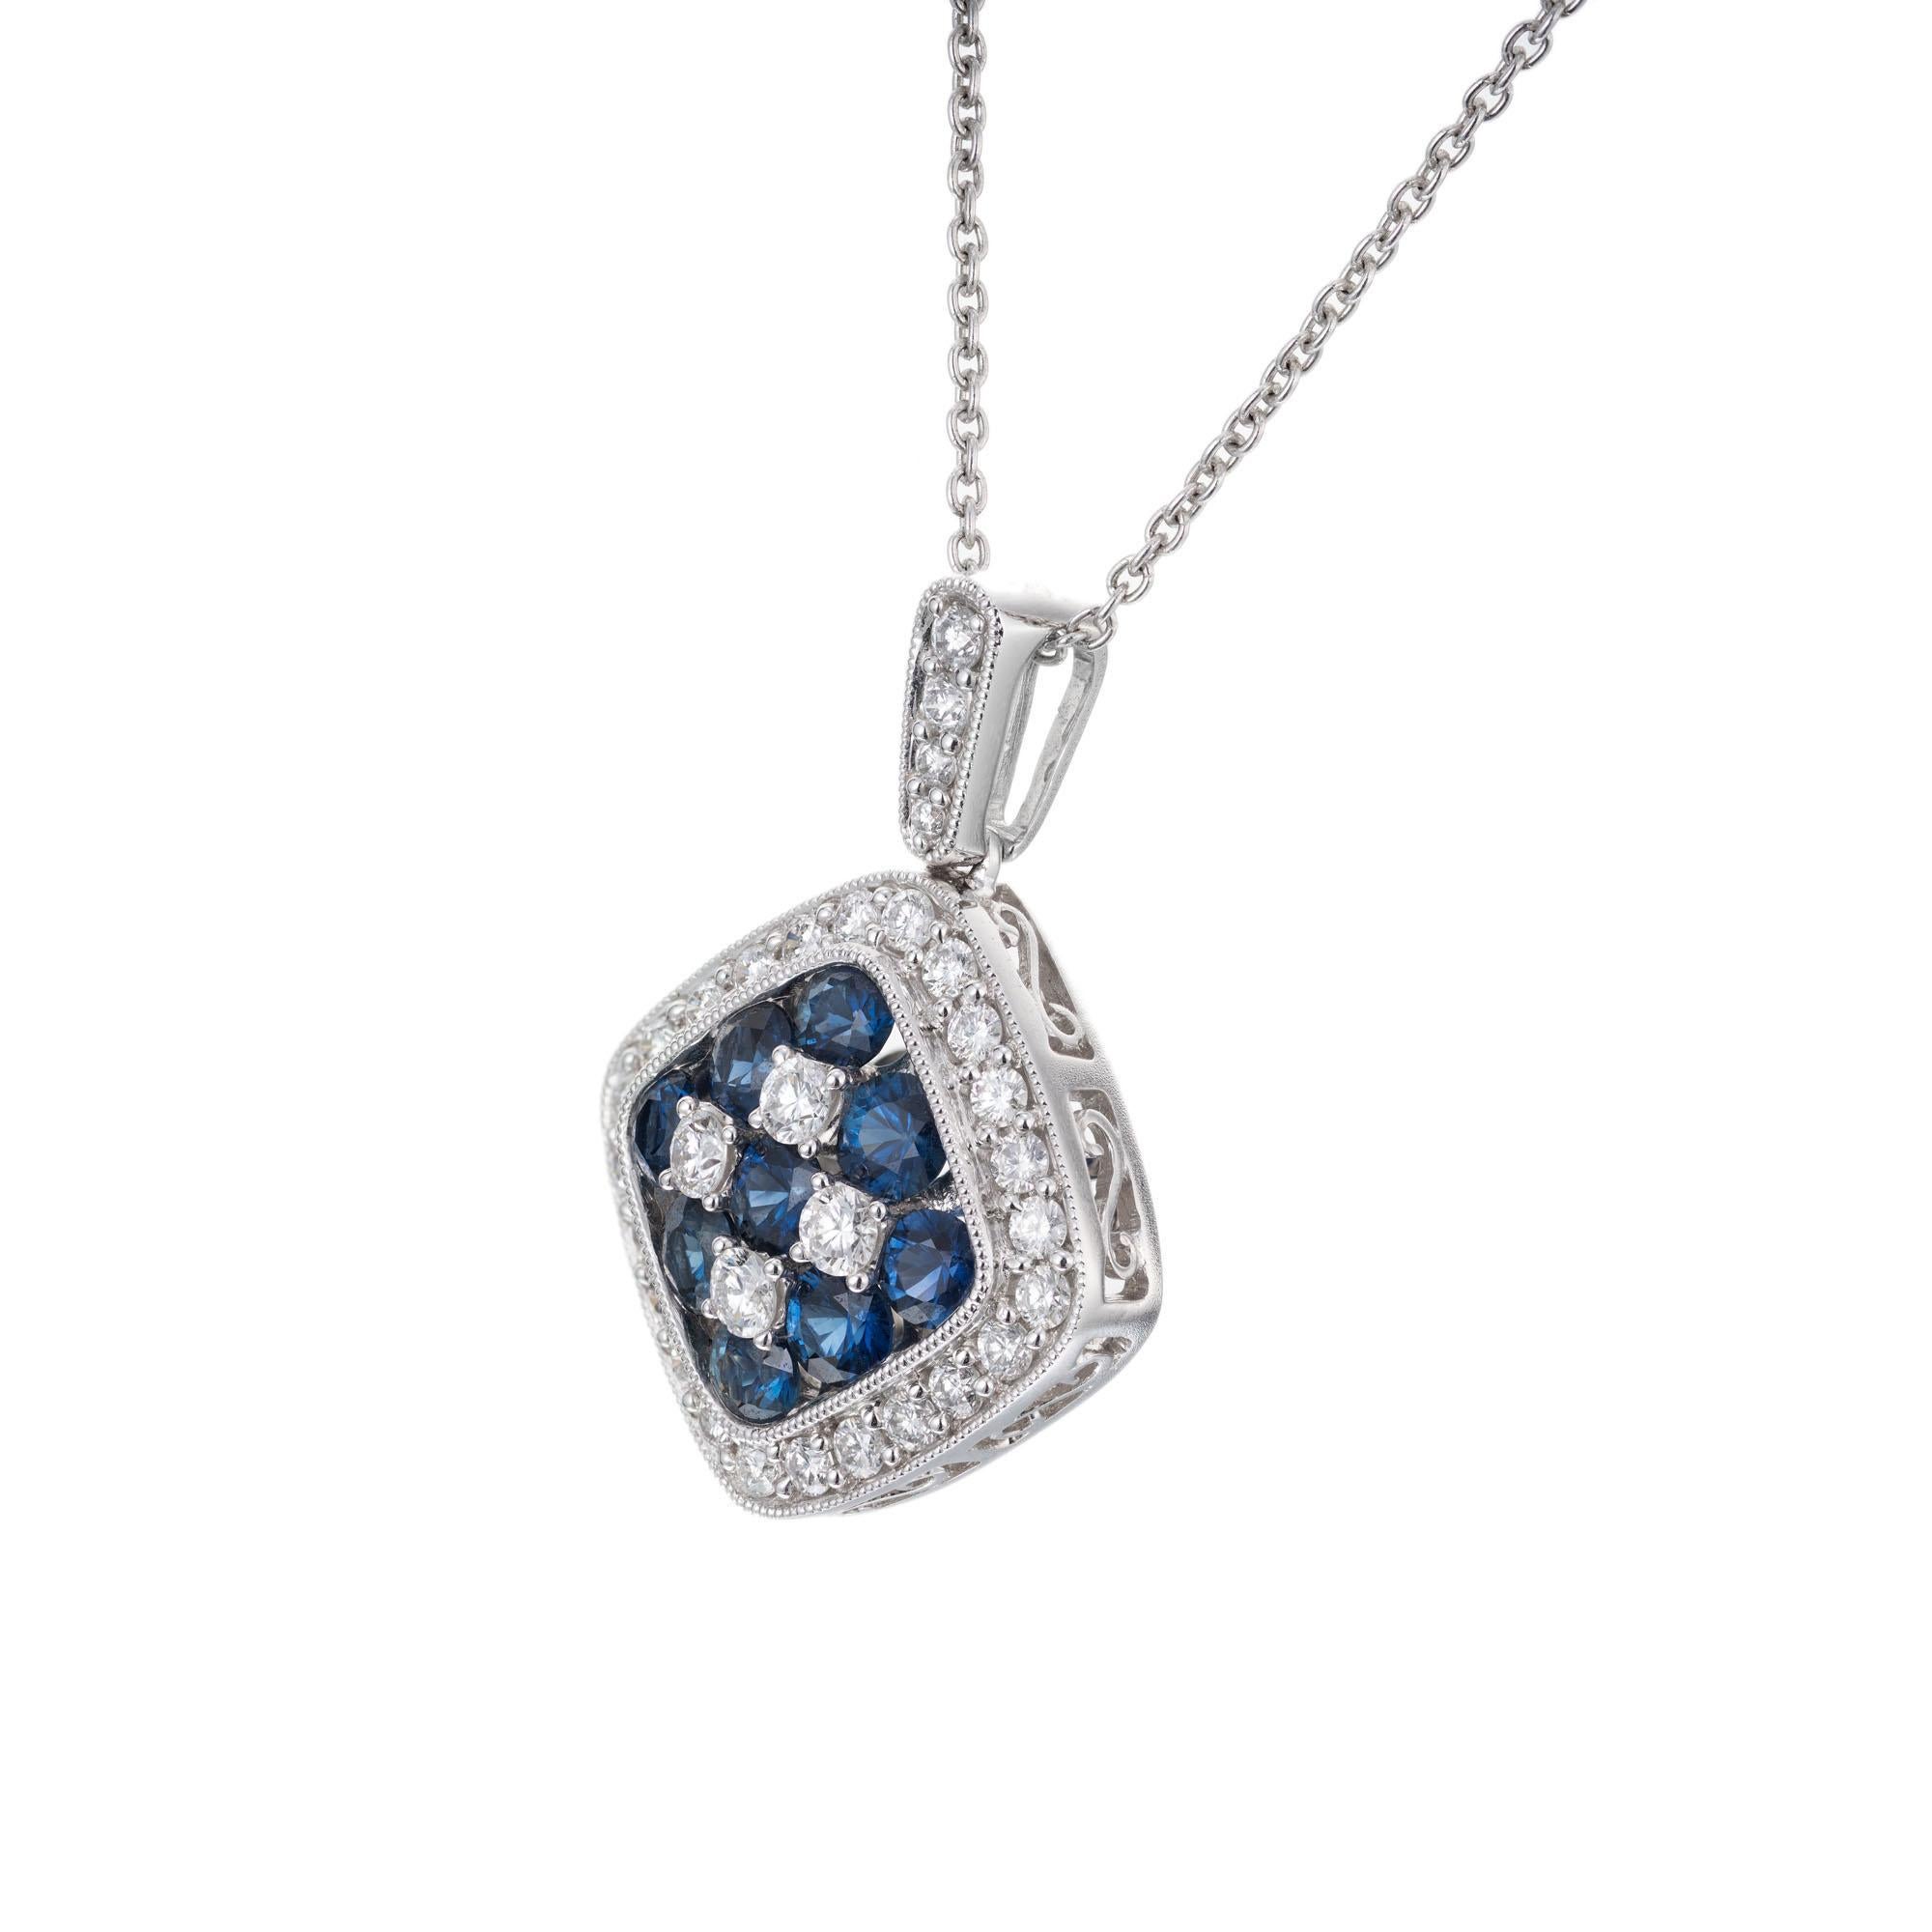 Gregg Ruth vivid blue sapphire and diamond Halo pendant necklace. 18k white gold cushion shape 

9 round bright blue sapphires, VS approx. 1.25cts
32 round brilliant cut diamonds, G VS approx. .64cts
18k white gold 
Stamped: K18
Hallmark: Gregg Ruth